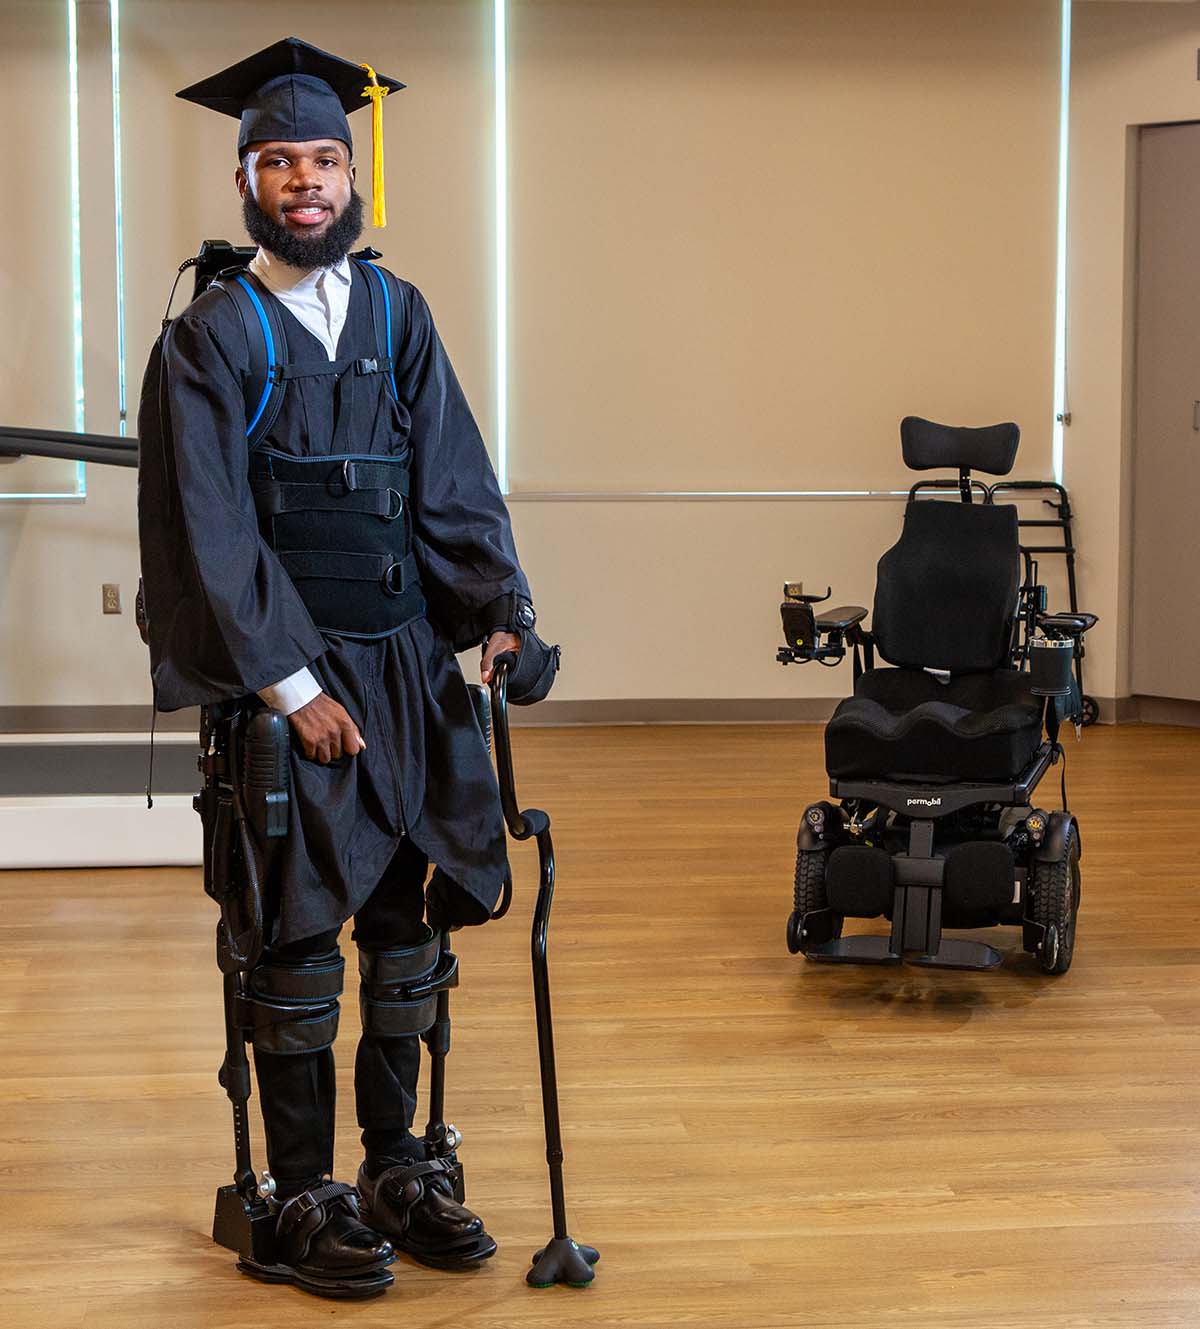 Khalil Watson wearing his graduation cap and gown, stands with the help of exoskeleton